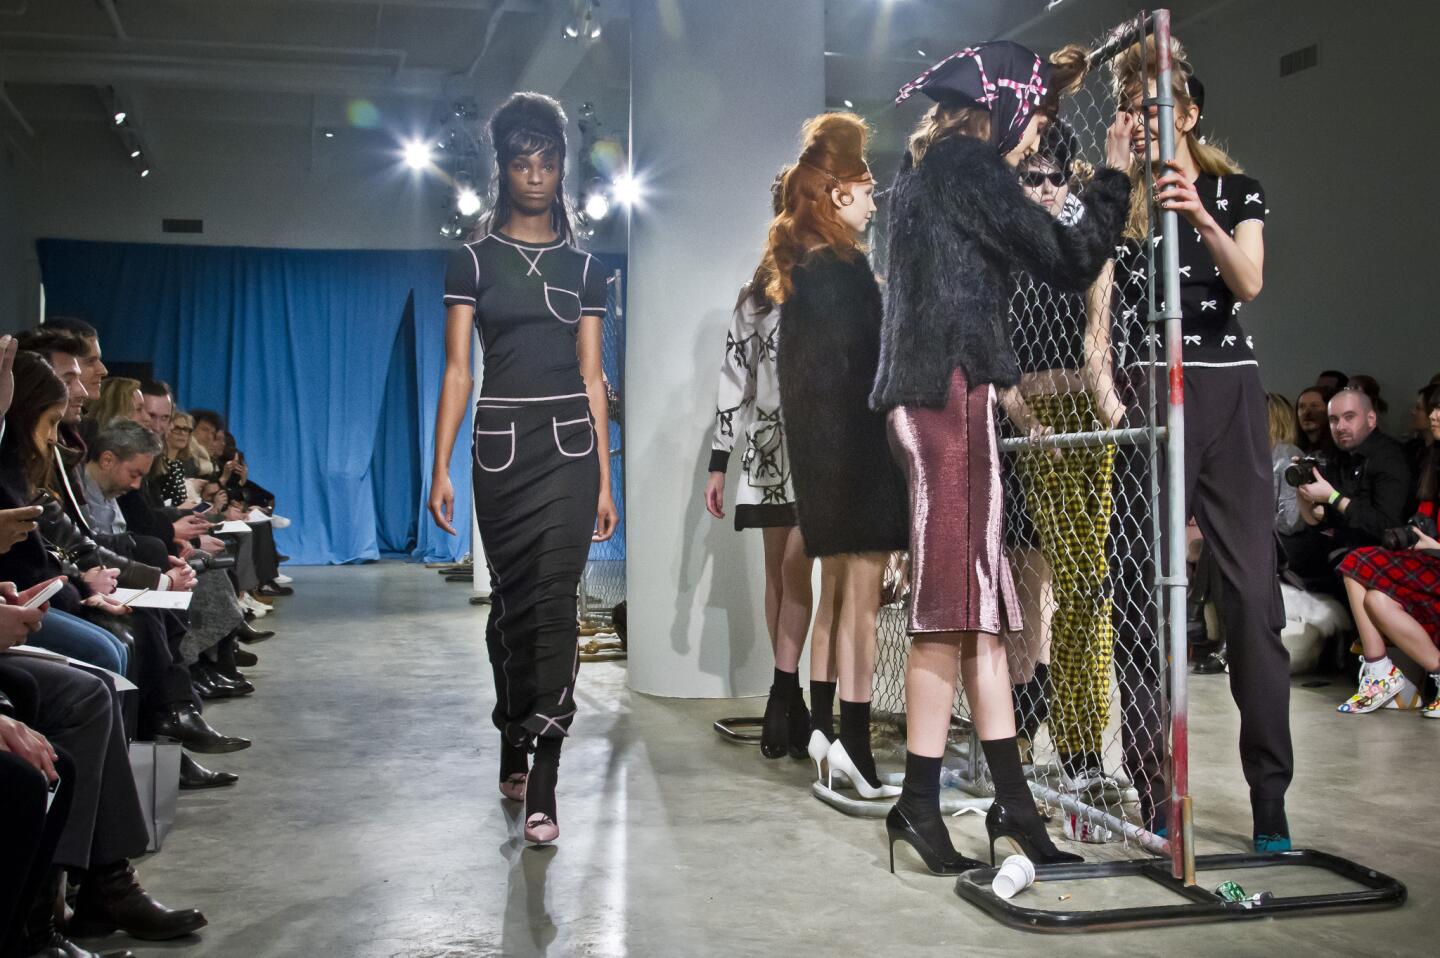 A chain-link fence keeps bad girls apart at the Adam Selman show.